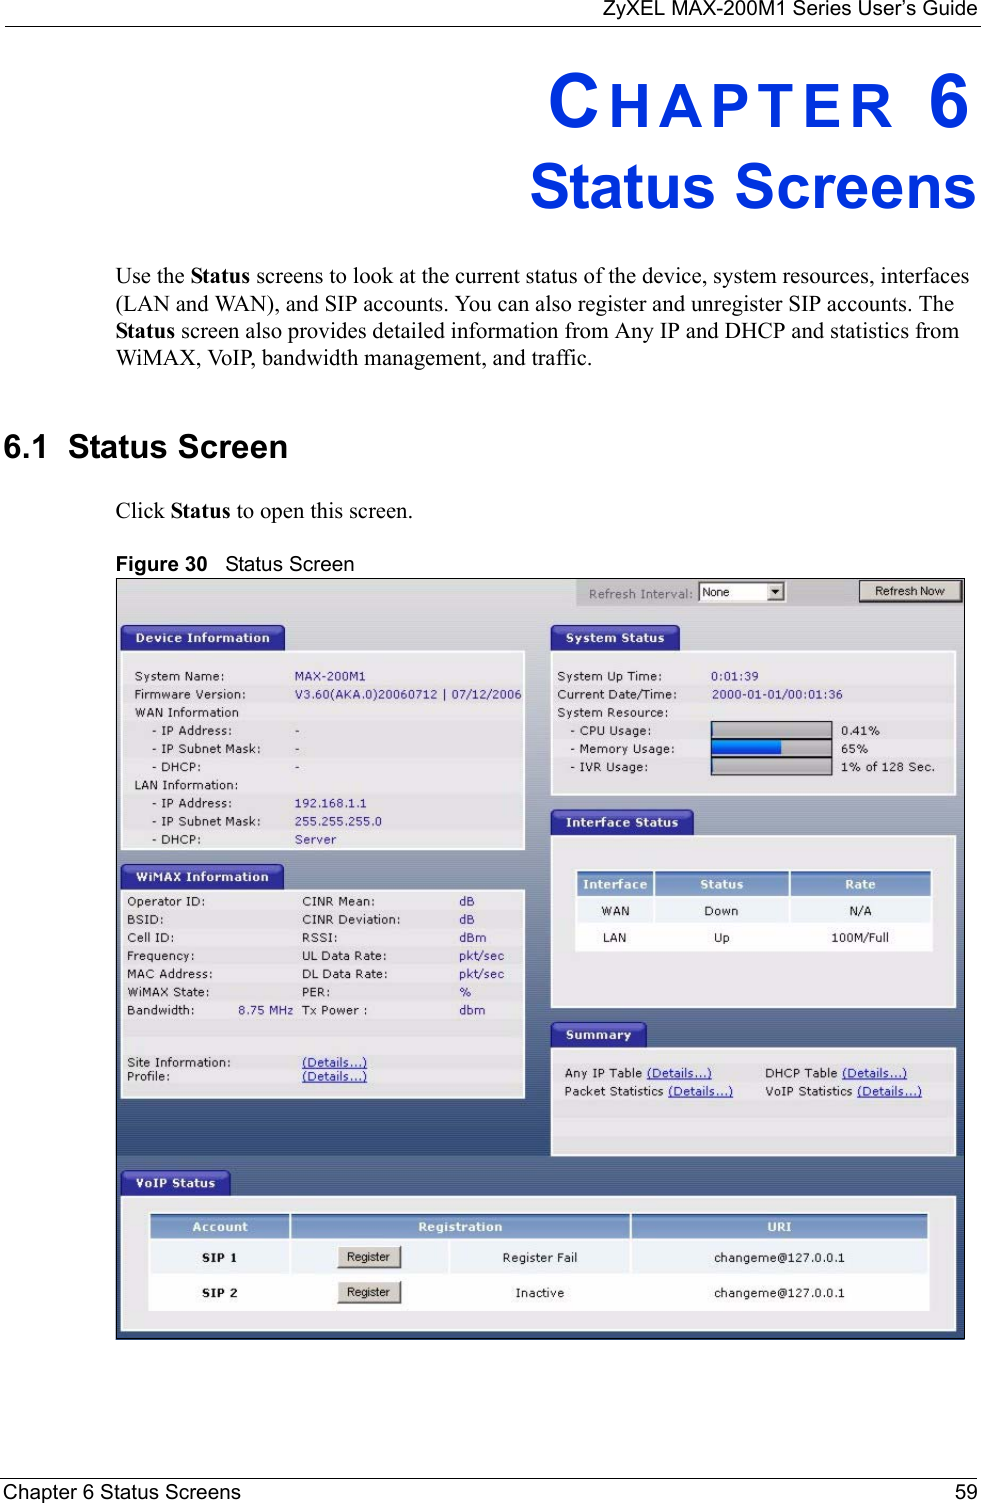 ZyXEL MAX-200M1 Series User’s GuideChapter 6 Status Screens 59CHAPTER 6Status ScreensUse the Status screens to look at the current status of the device, system resources, interfaces (LAN and WAN), and SIP accounts. You can also register and unregister SIP accounts. The Status screen also provides detailed information from Any IP and DHCP and statistics from WiMAX, VoIP, bandwidth management, and traffic.6.1  Status ScreenClick Status to open this screen.Figure 30   Status Screen